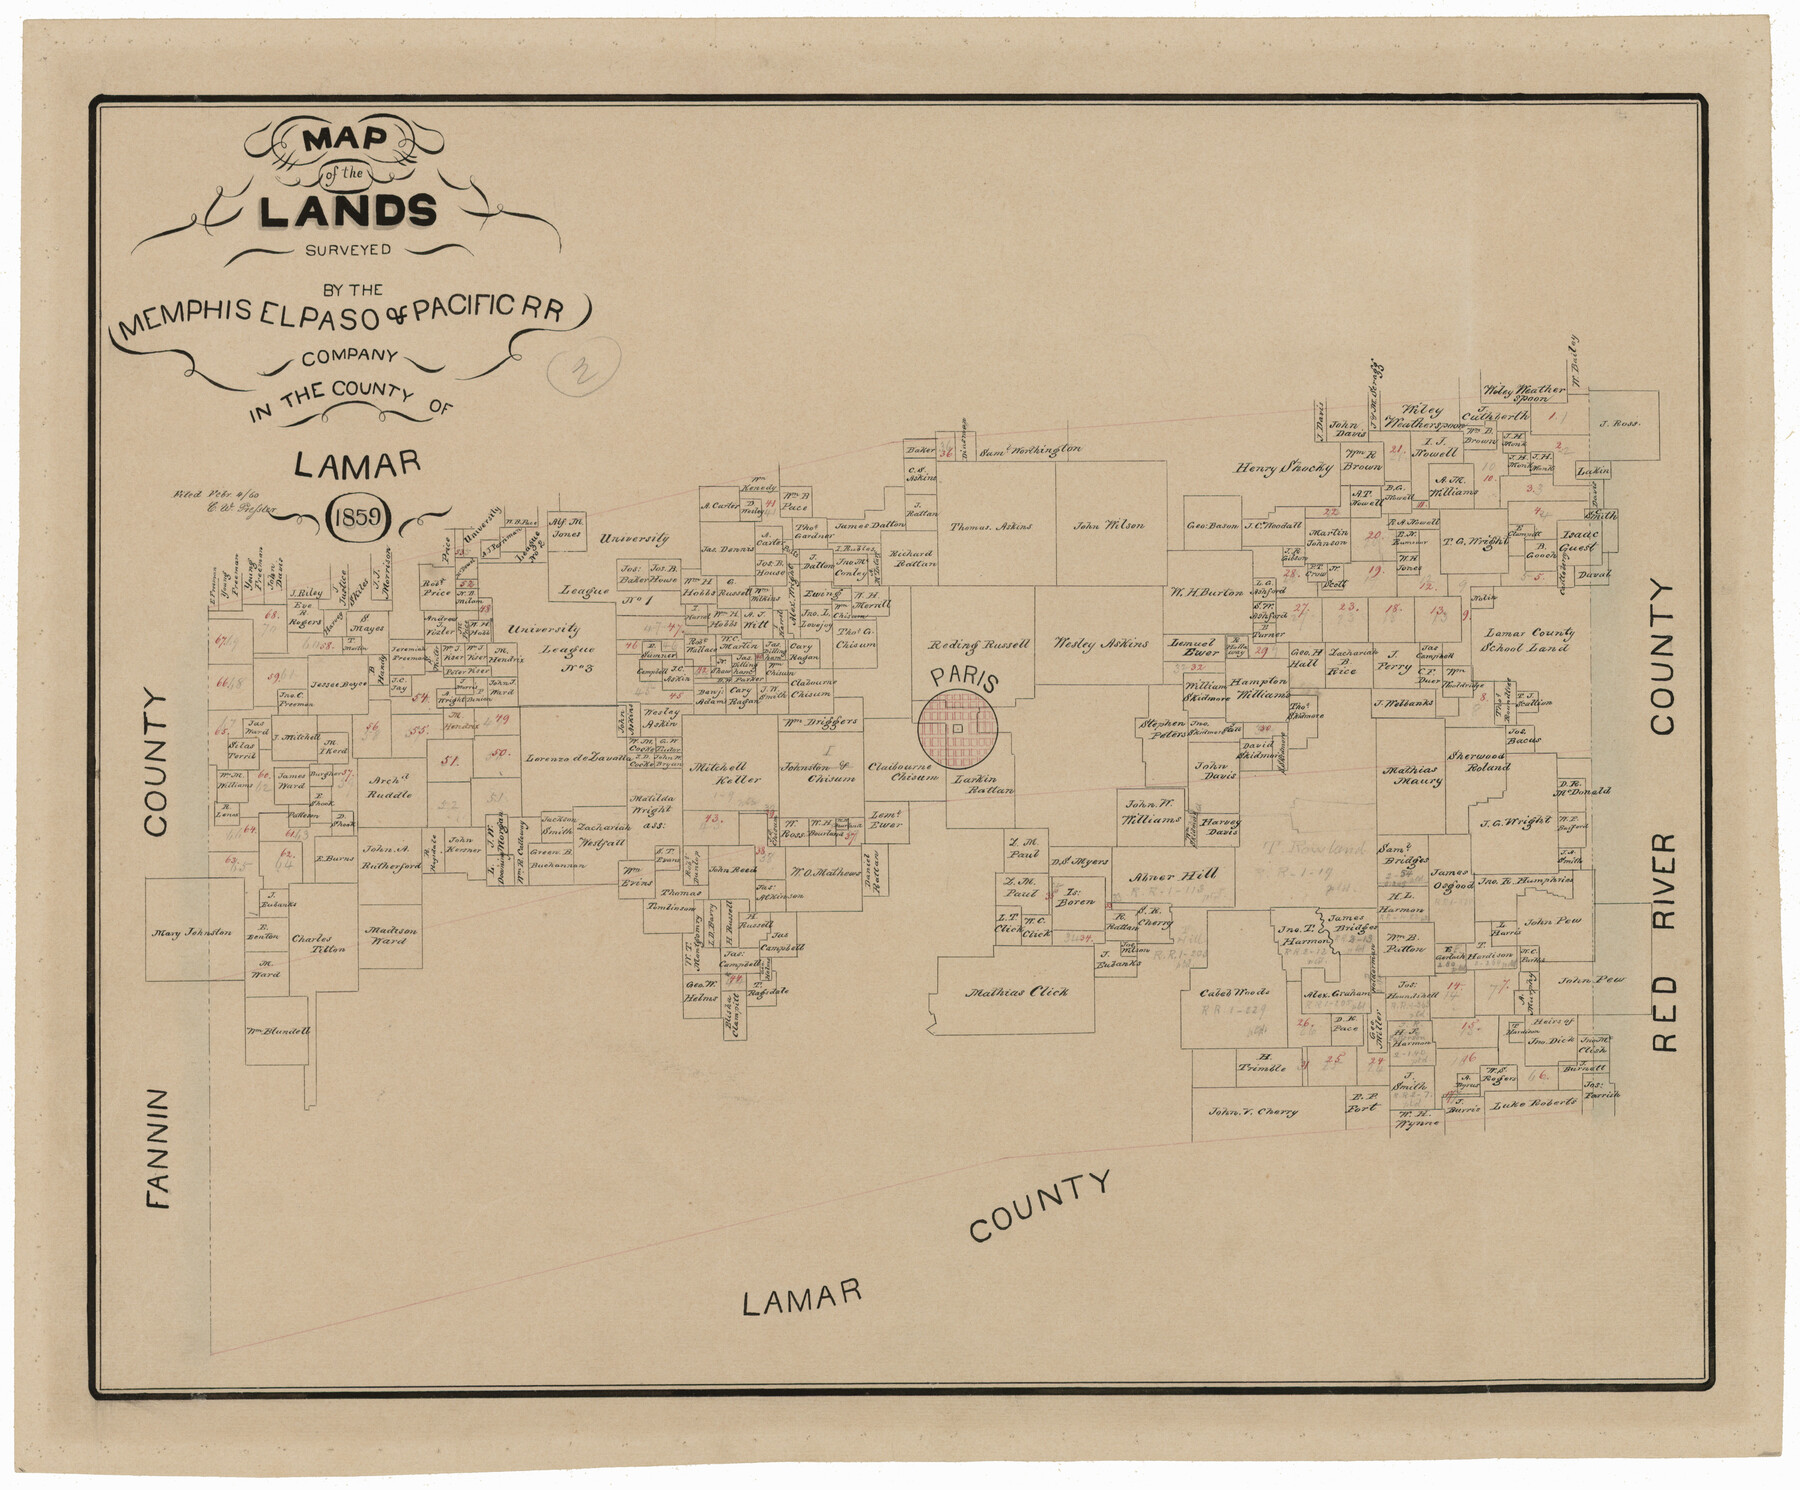 4844, Map of the Lands Surveyed by the Memphis, El Paso & Pacific R.R. Company, General Map Collection